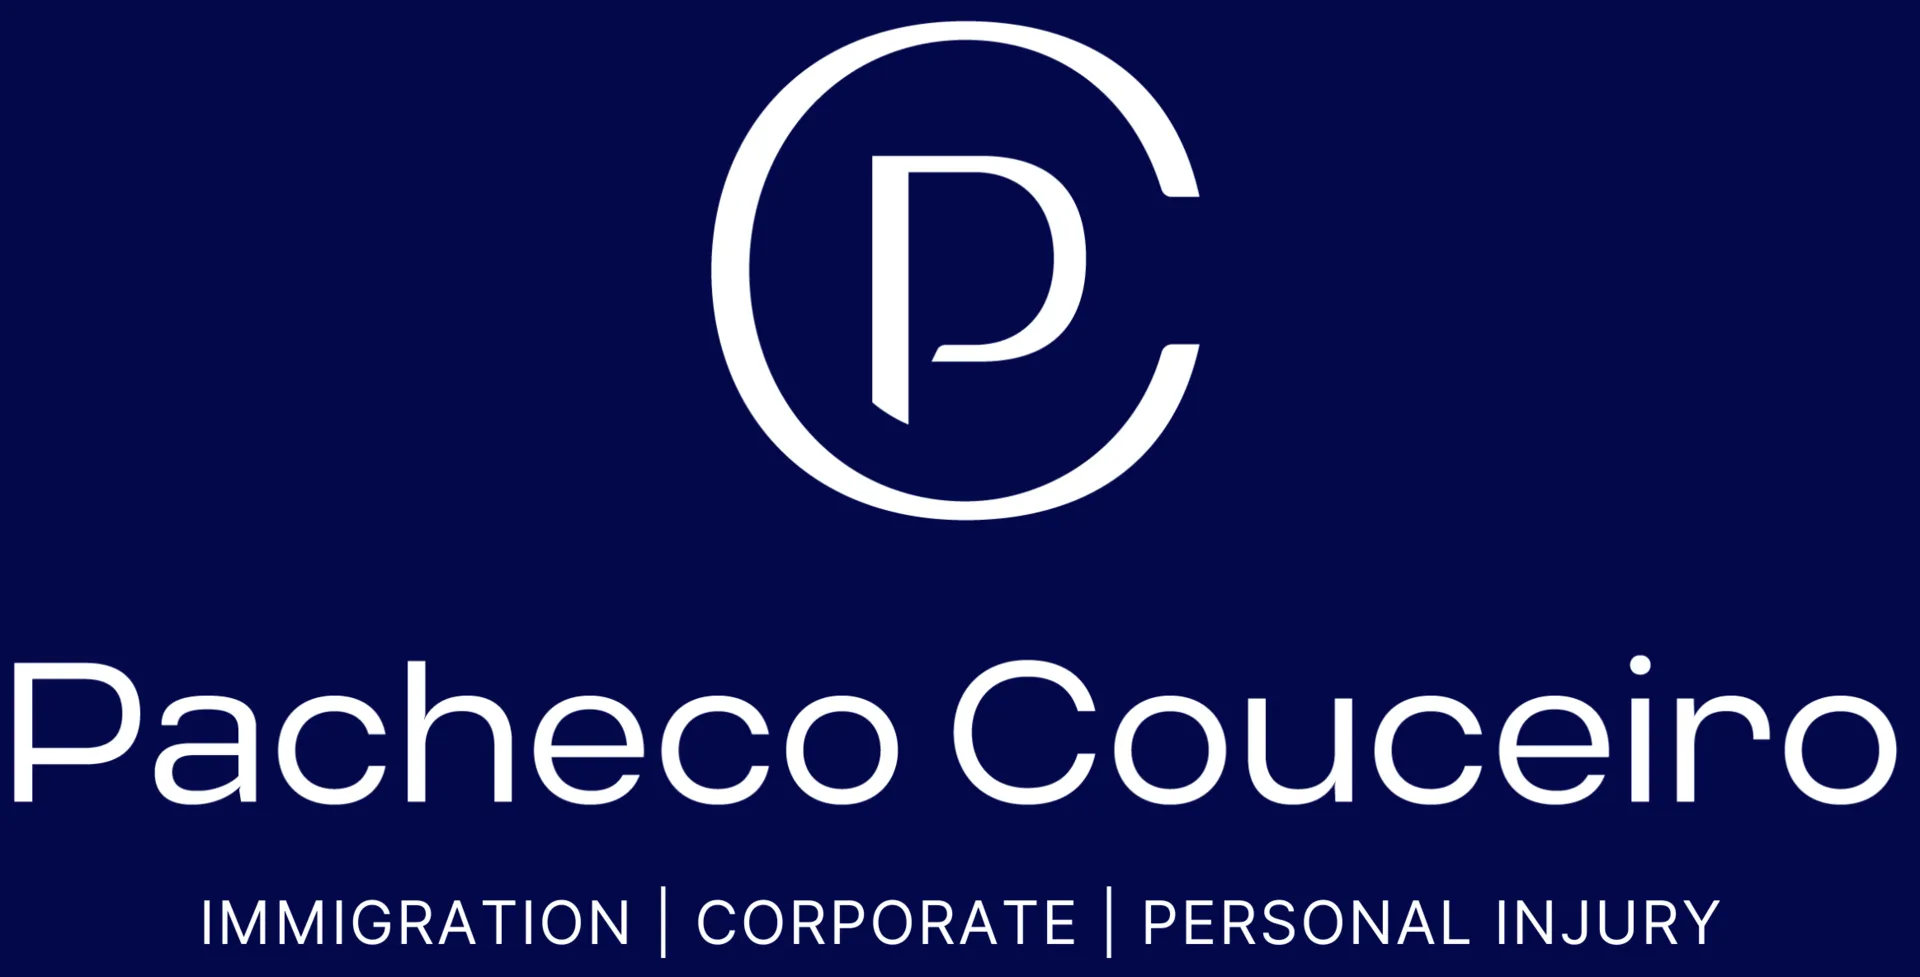 Pacheco Couceiro Immigration Attorneys